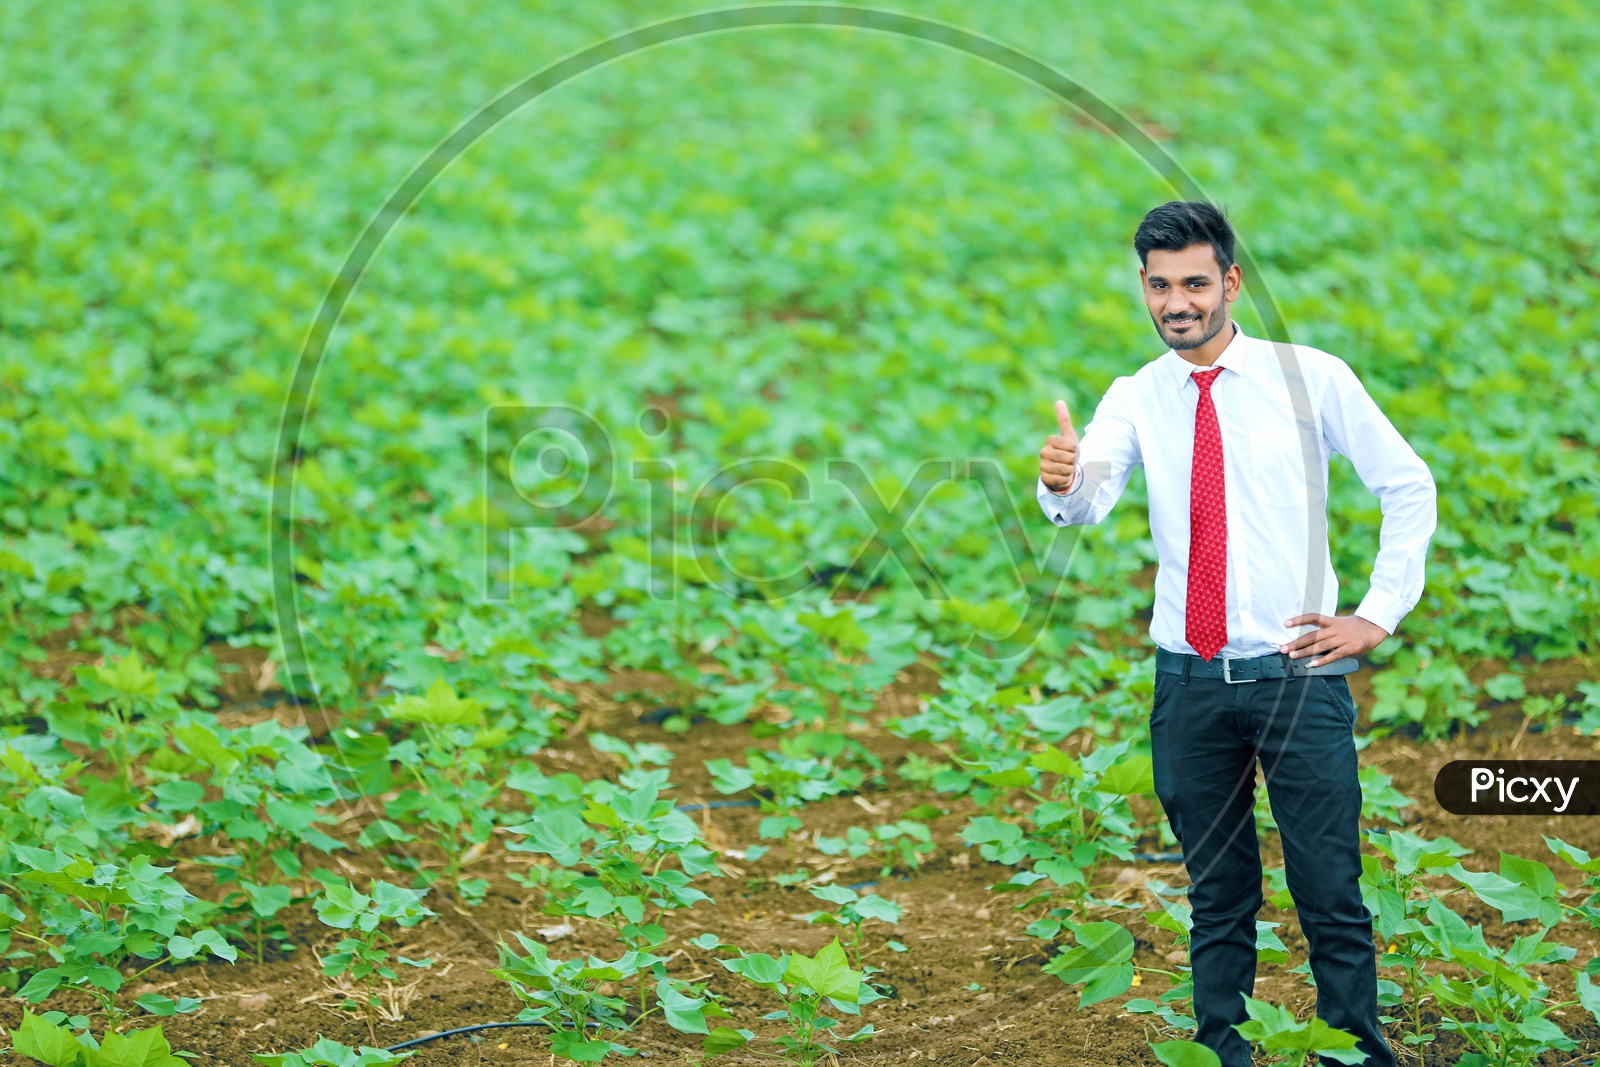 A Young Professional In Agricultural Field With an Expression